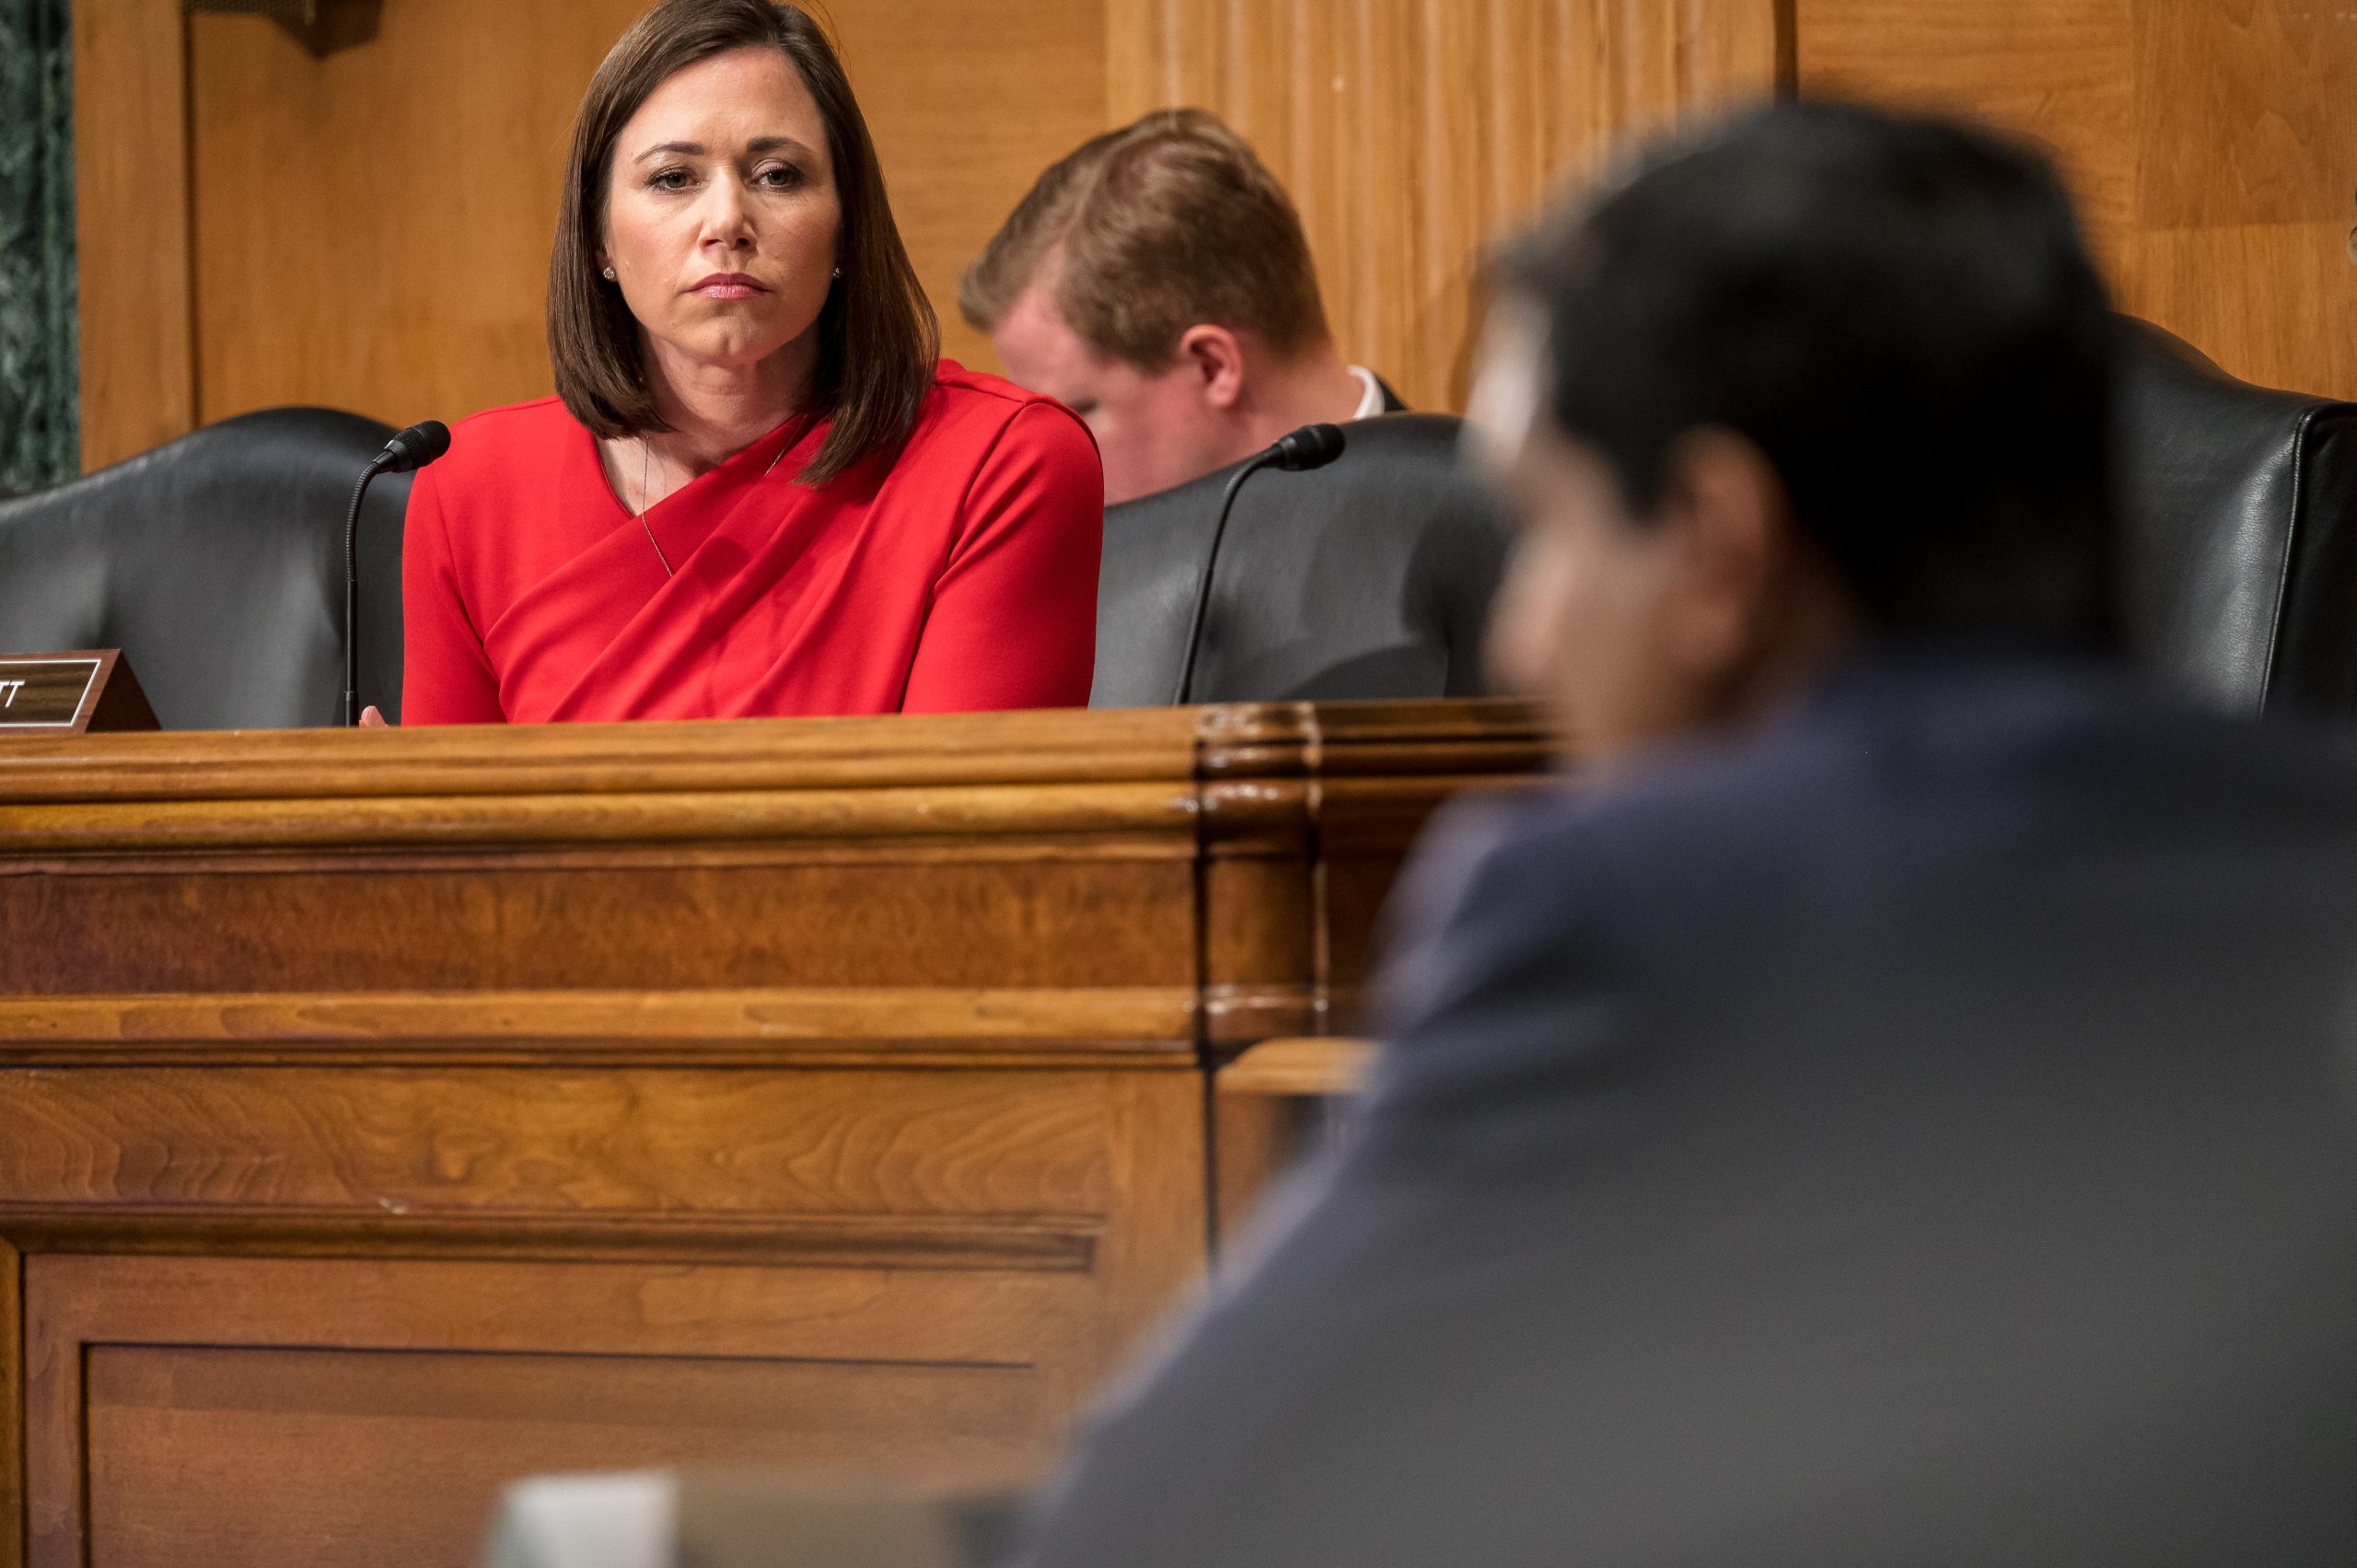 Hearings to examine advancing national security and foreign policy through sanctions, export controls, and other economic tools. (Official U.S. Senate photo by Renee Bouchard)